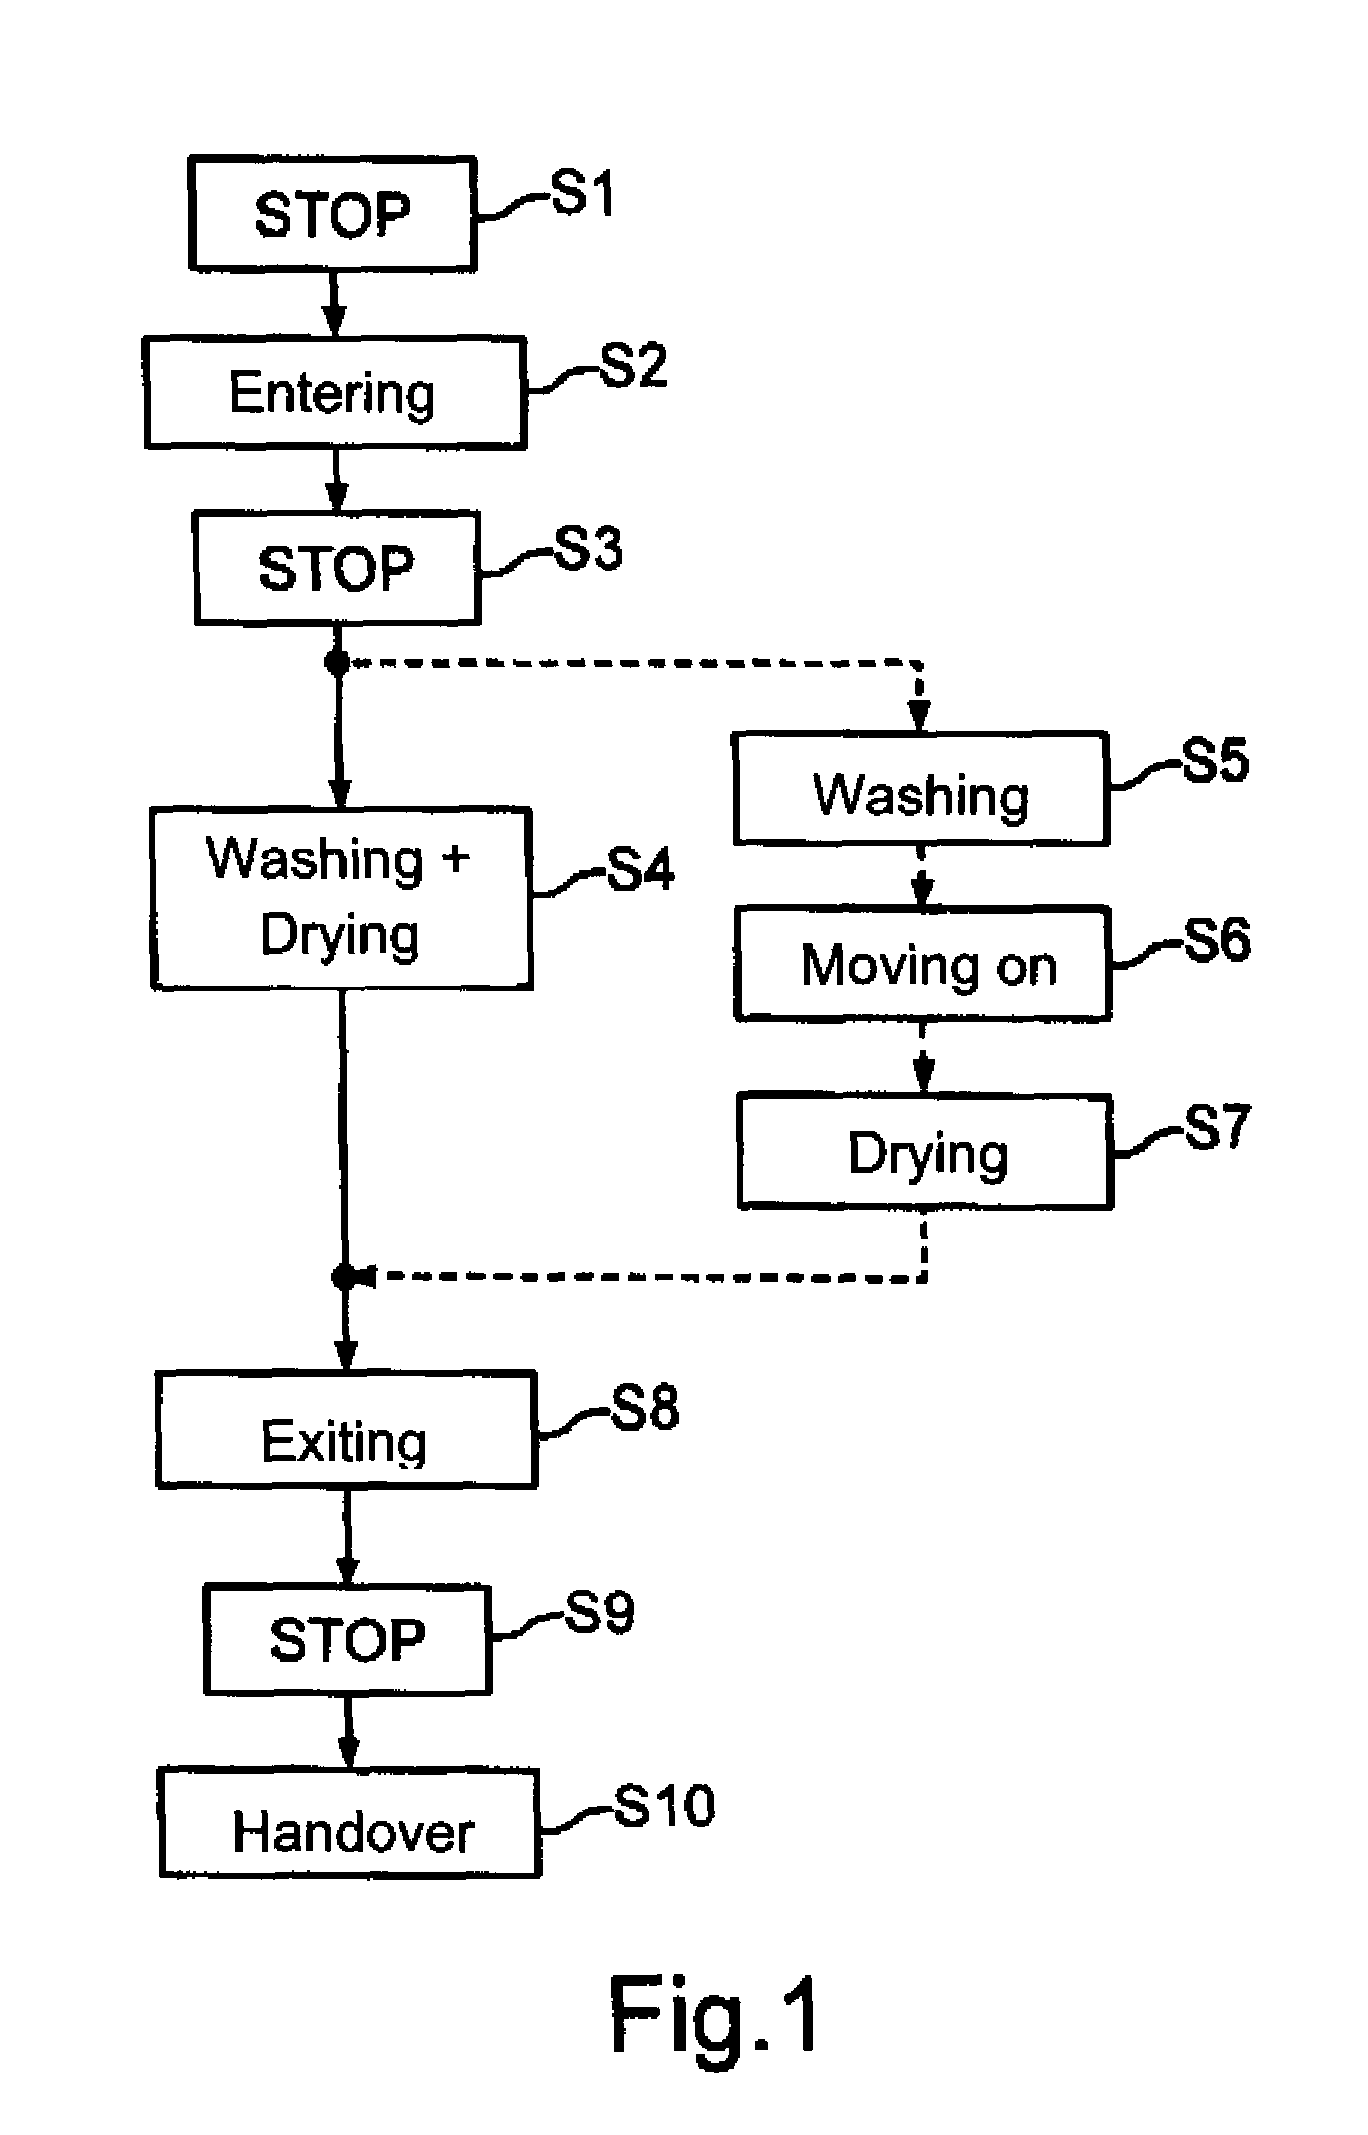 Autonomous operation of a motor vehicle in a car wash